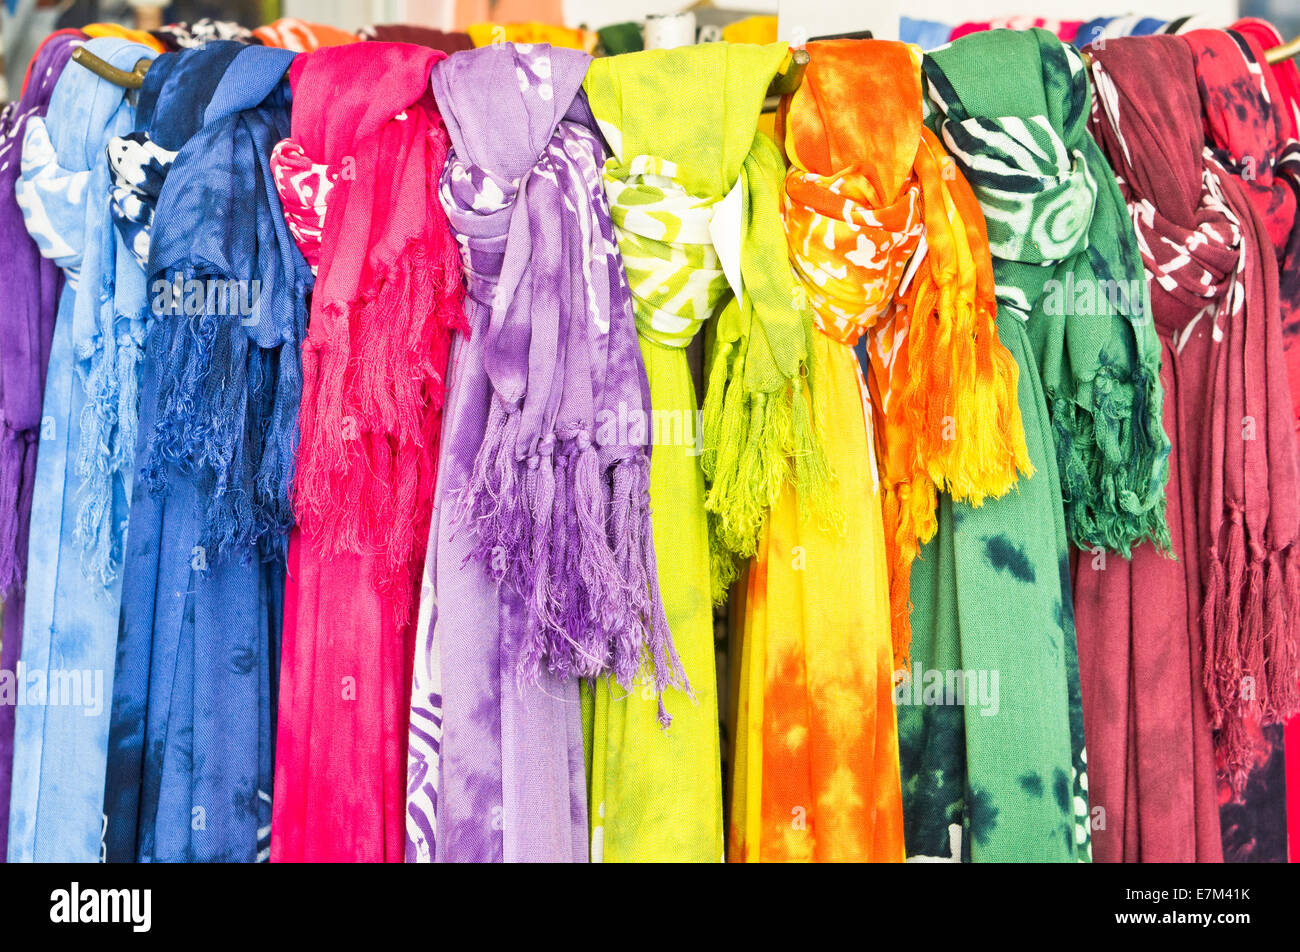 Selection of colorful women's scarves at a market Stock Photo